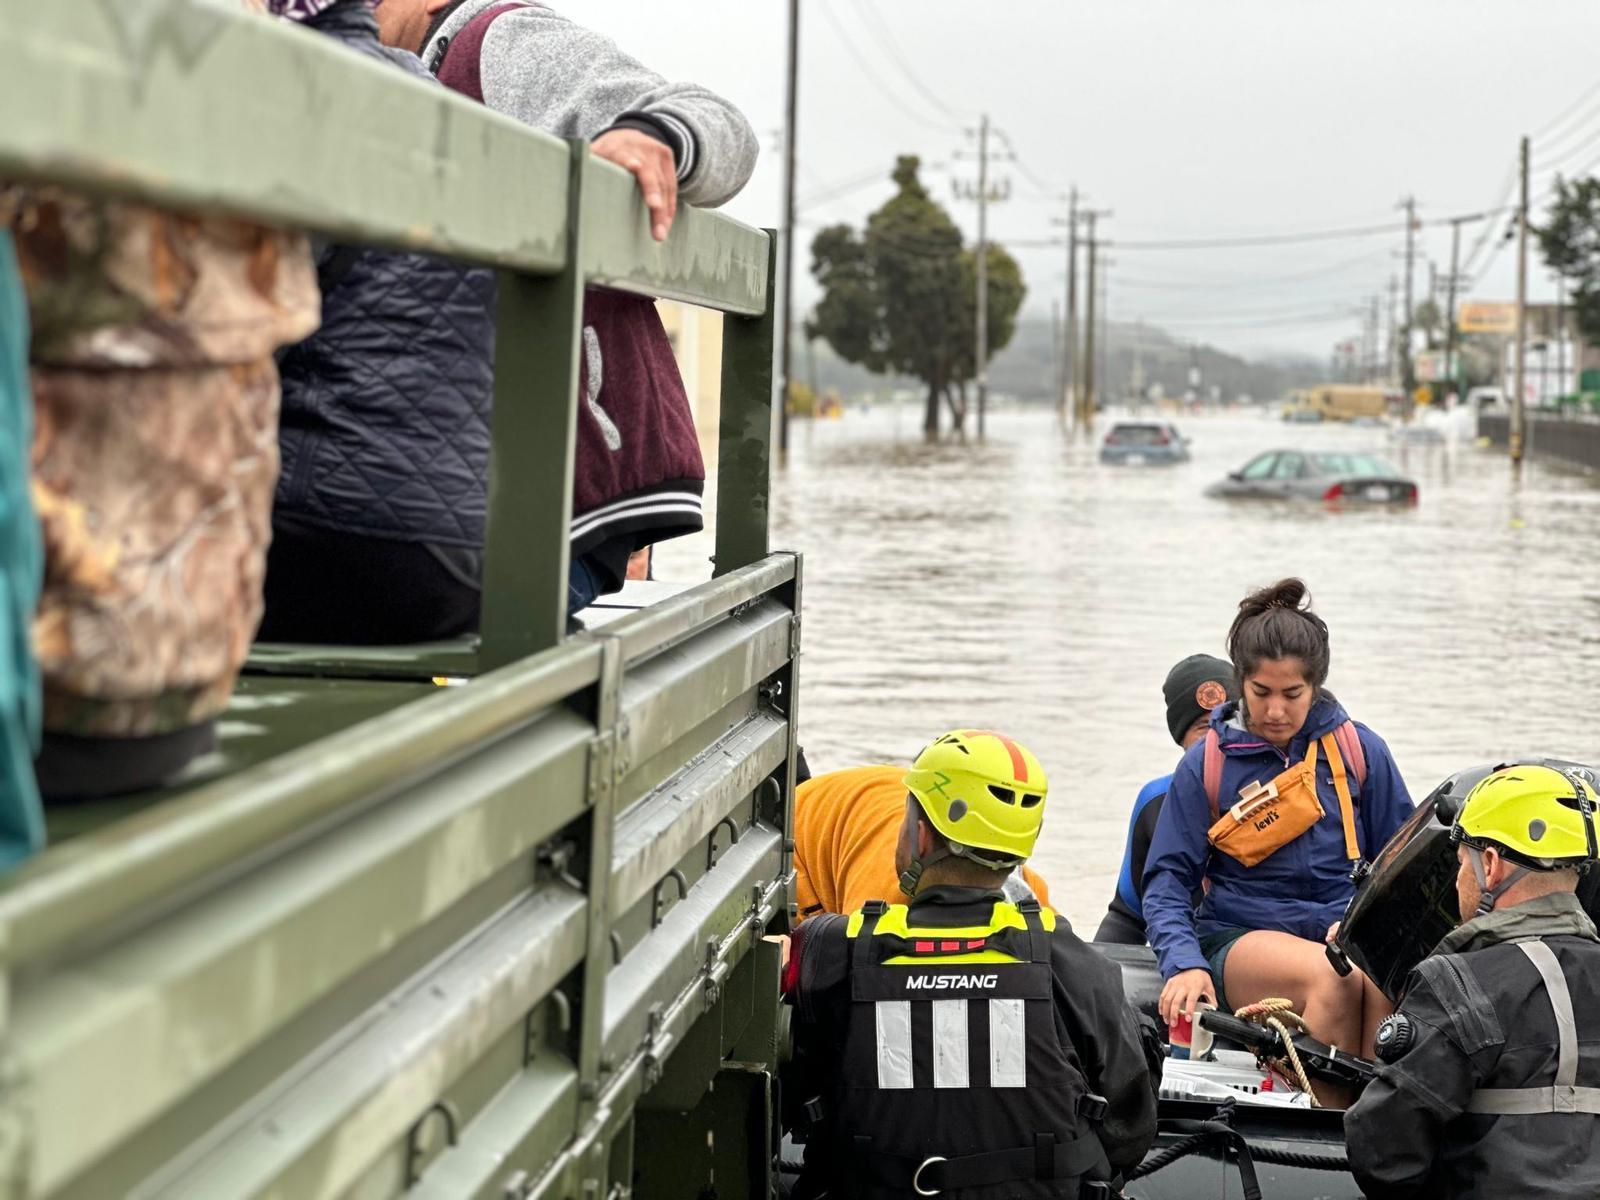 Members of the California National Guard  assist local first responders in rescue operations during  flooding in Pajaro, California, March 11, 2023. (Photo couresty of 1-184 Infantry Regiment, California National Guard)